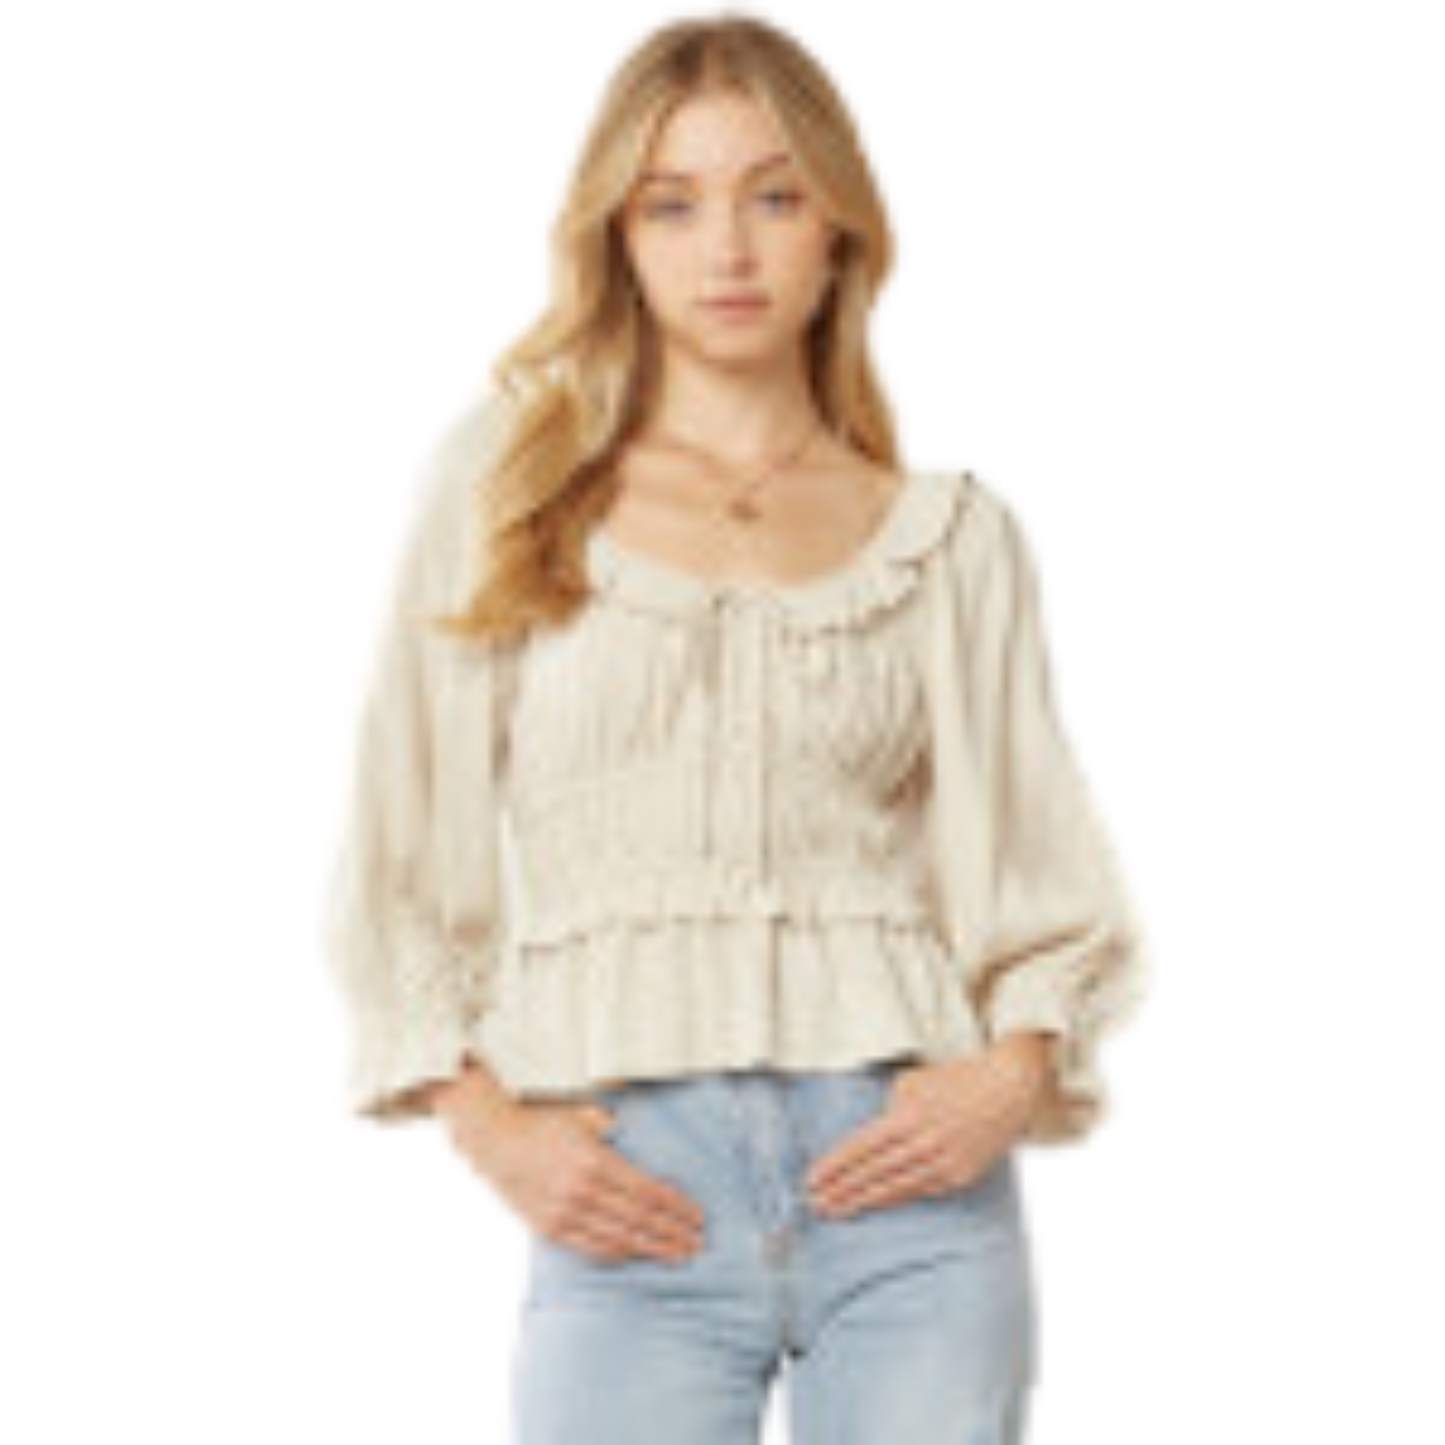 Introducing the Linen Draw String Top, with classic styling and essential details. The beautiful cream color and stylish ruffle neckline define this cropped top, while the cinched waist adds a flattering fit. Perfect for any summer occasion.